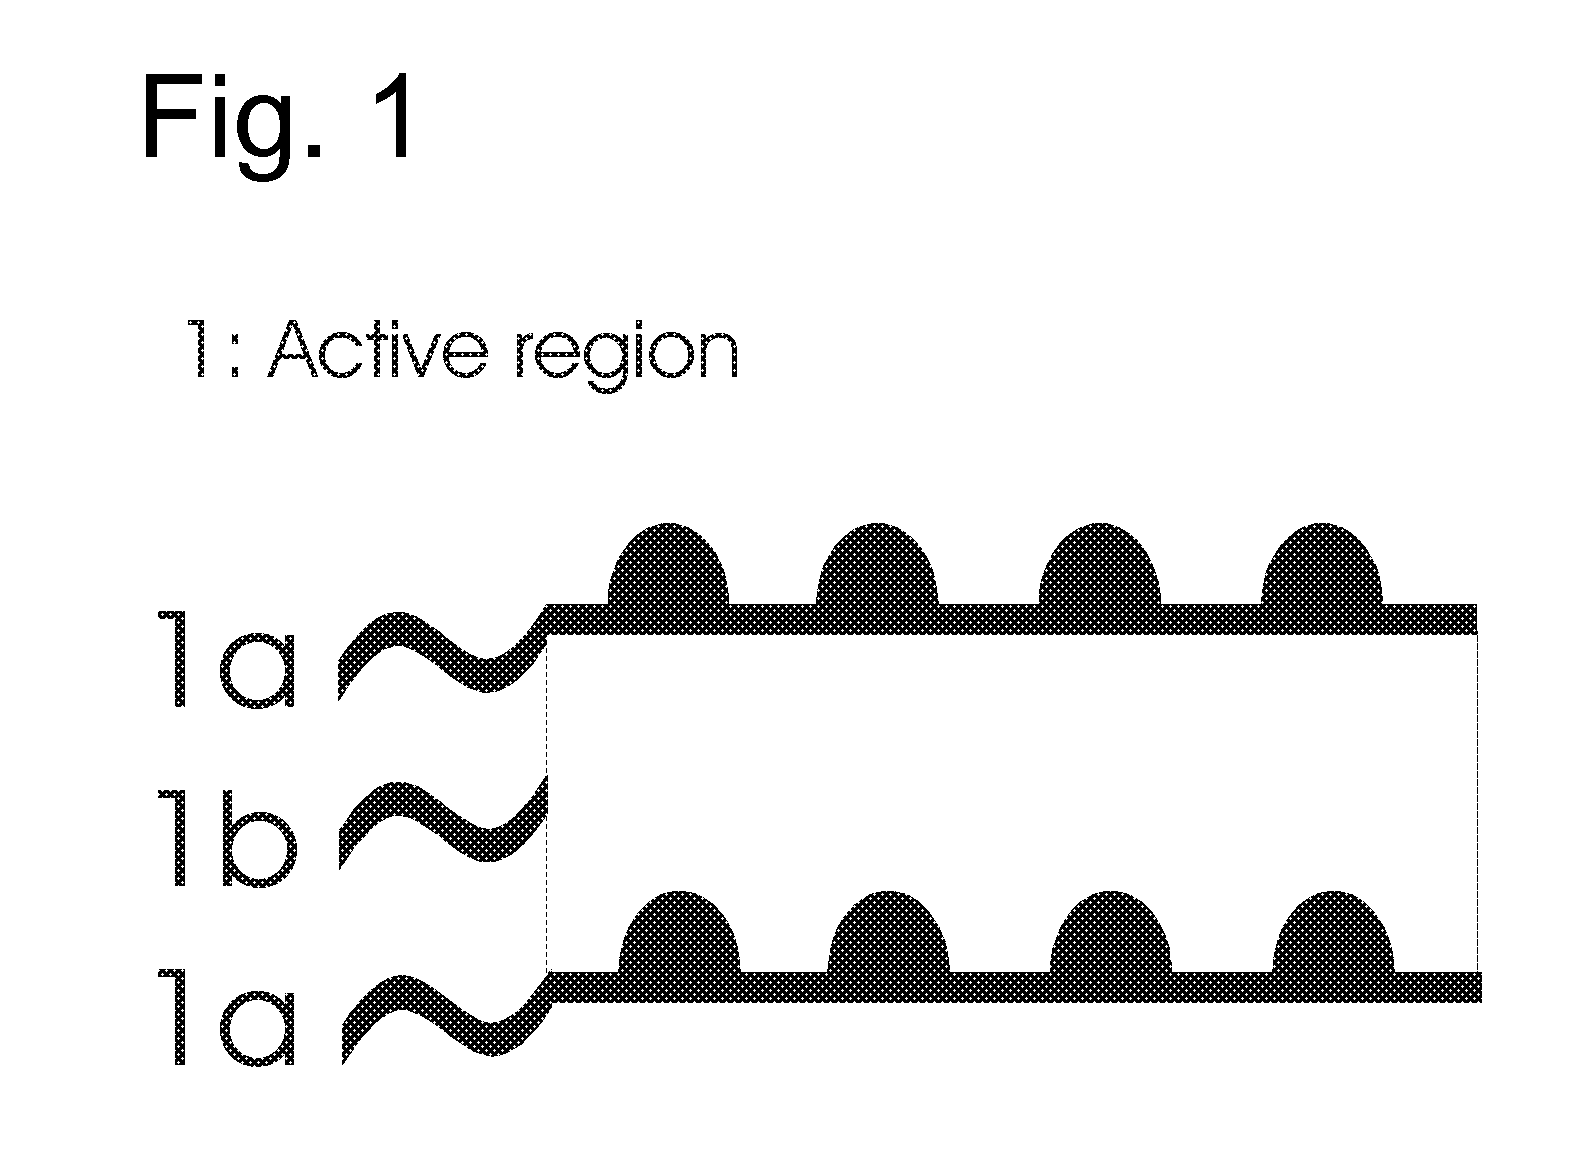 Method of growing an active region in a semiconductor device using molecular beam epitaxy